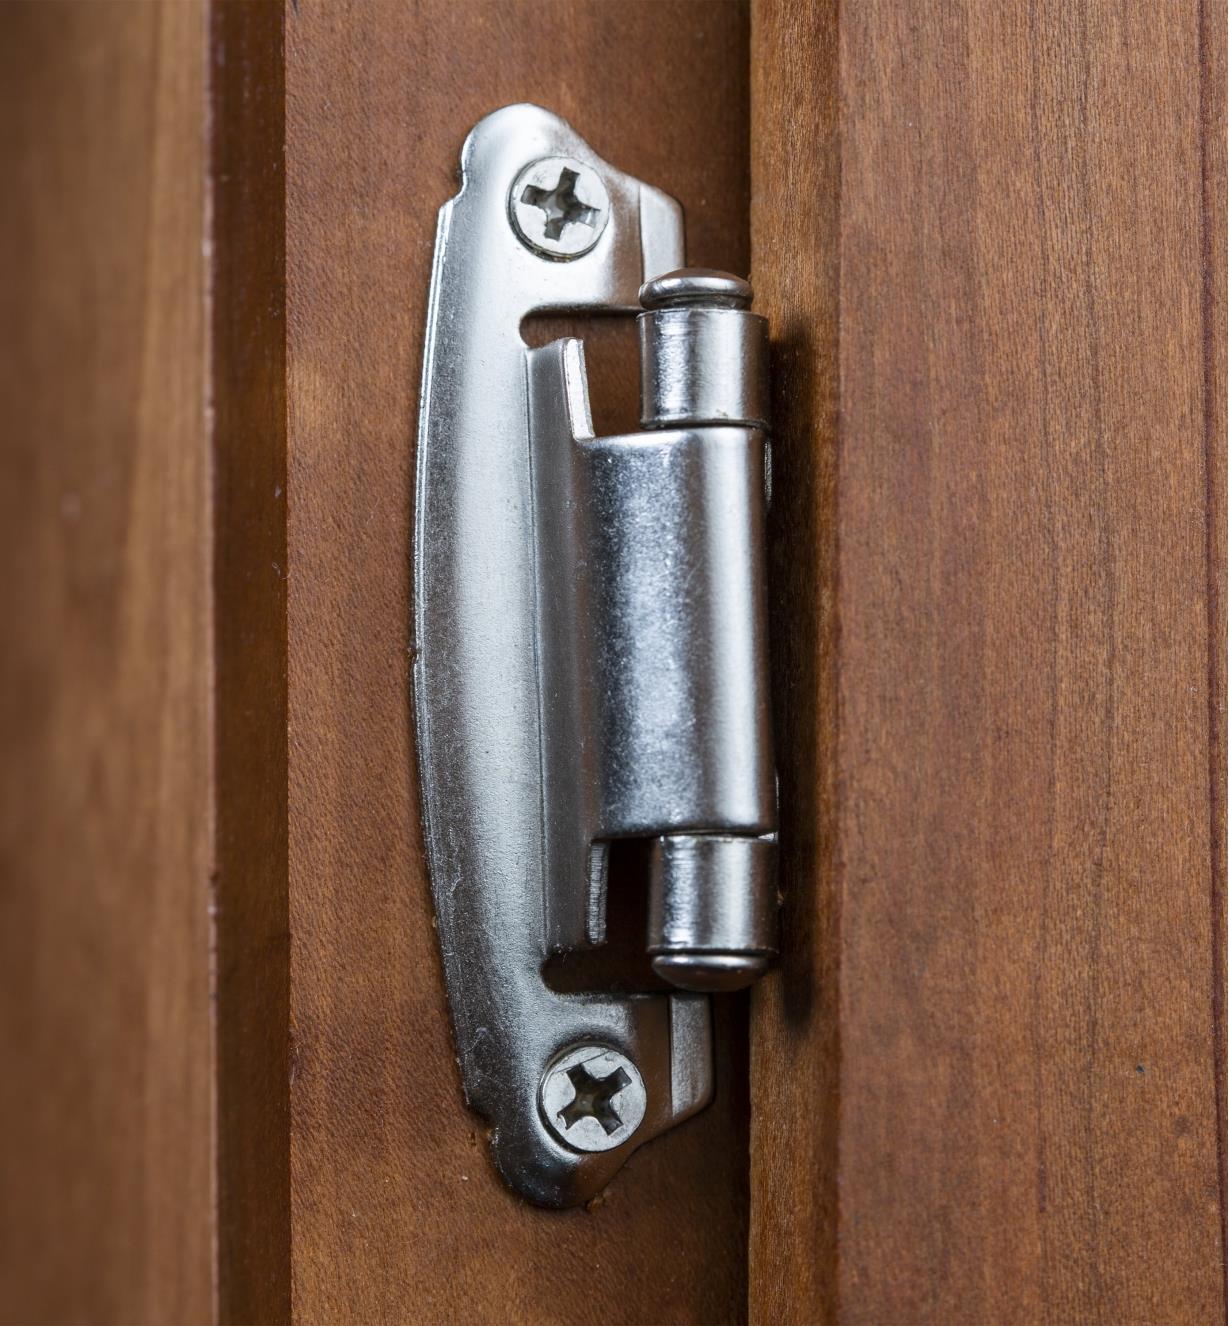 A 2 5/8" self-closing standard hinge installed on a cabinet